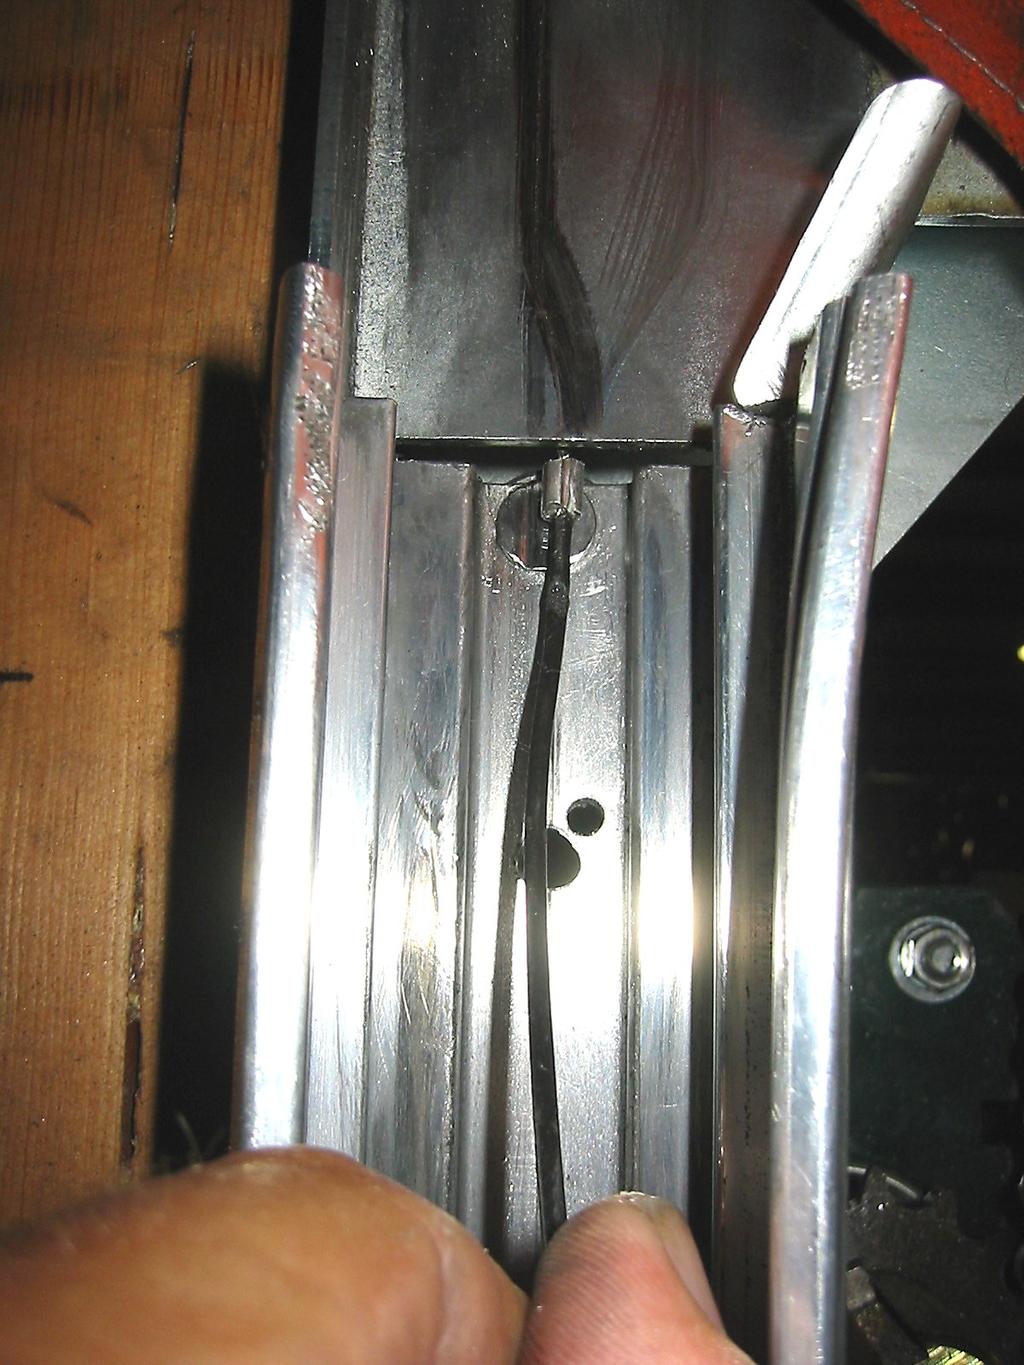 Extrusion and the bottom of the funnel section of the Upper Bracketry as shown in the following